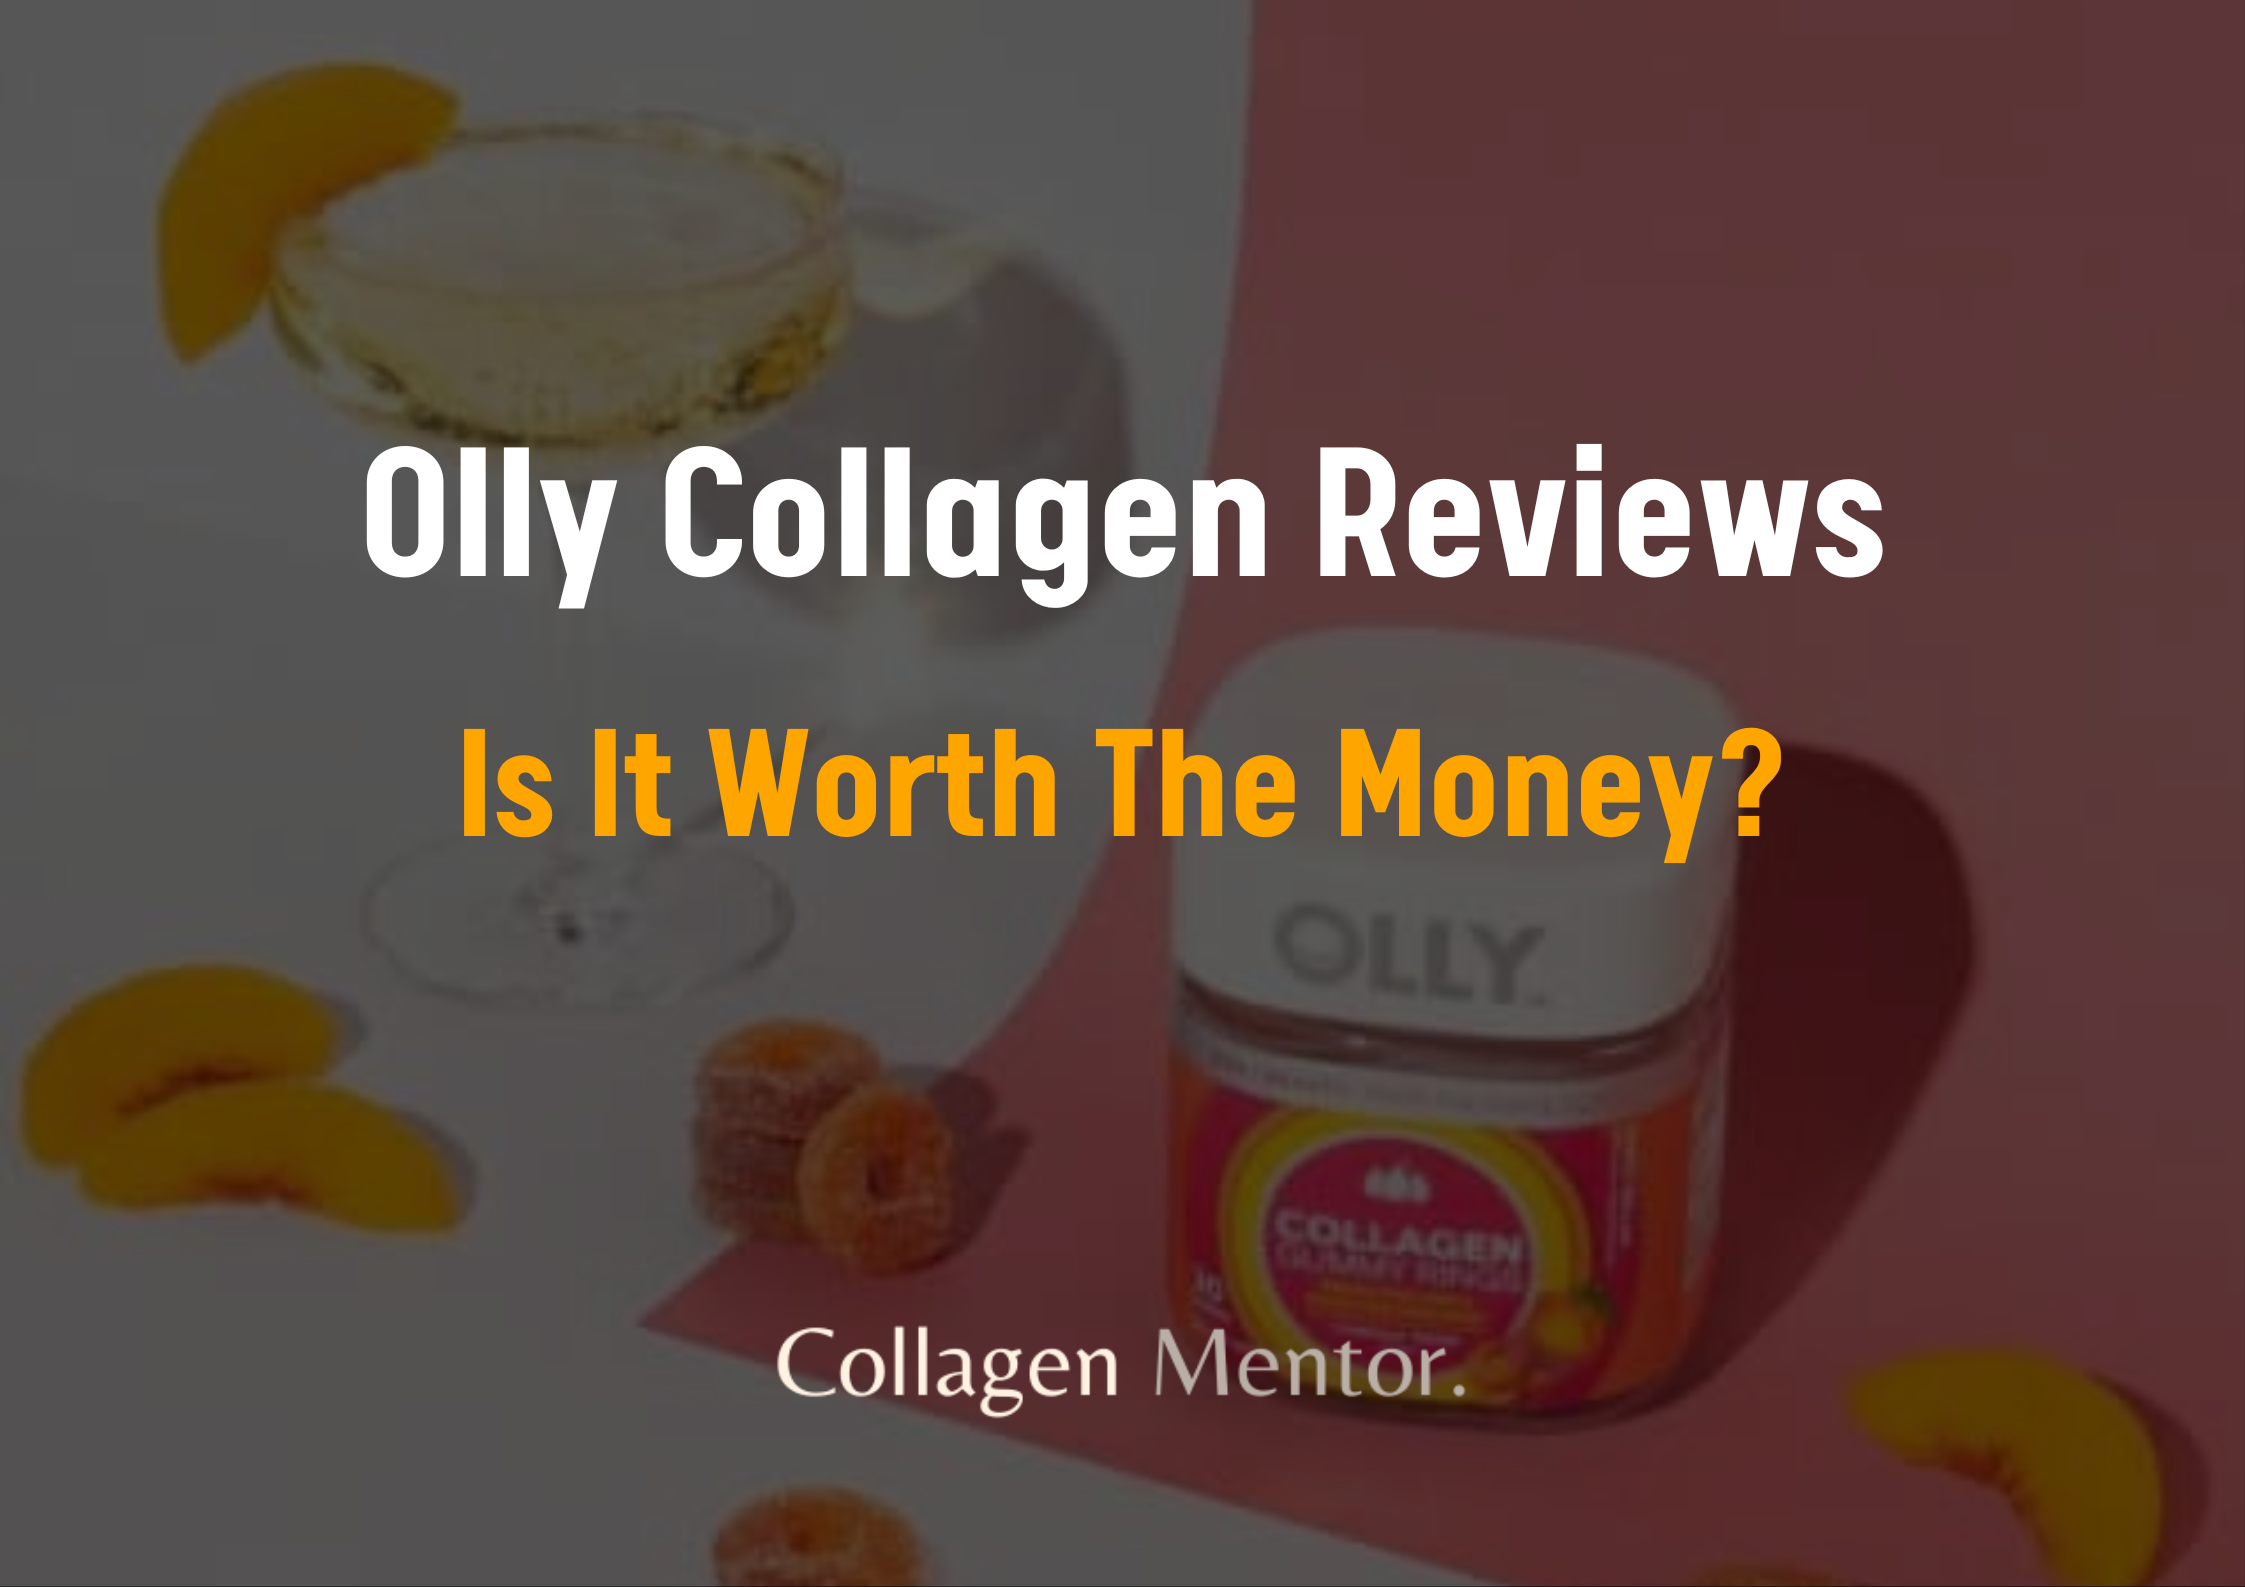 Olly Collagen Reviews